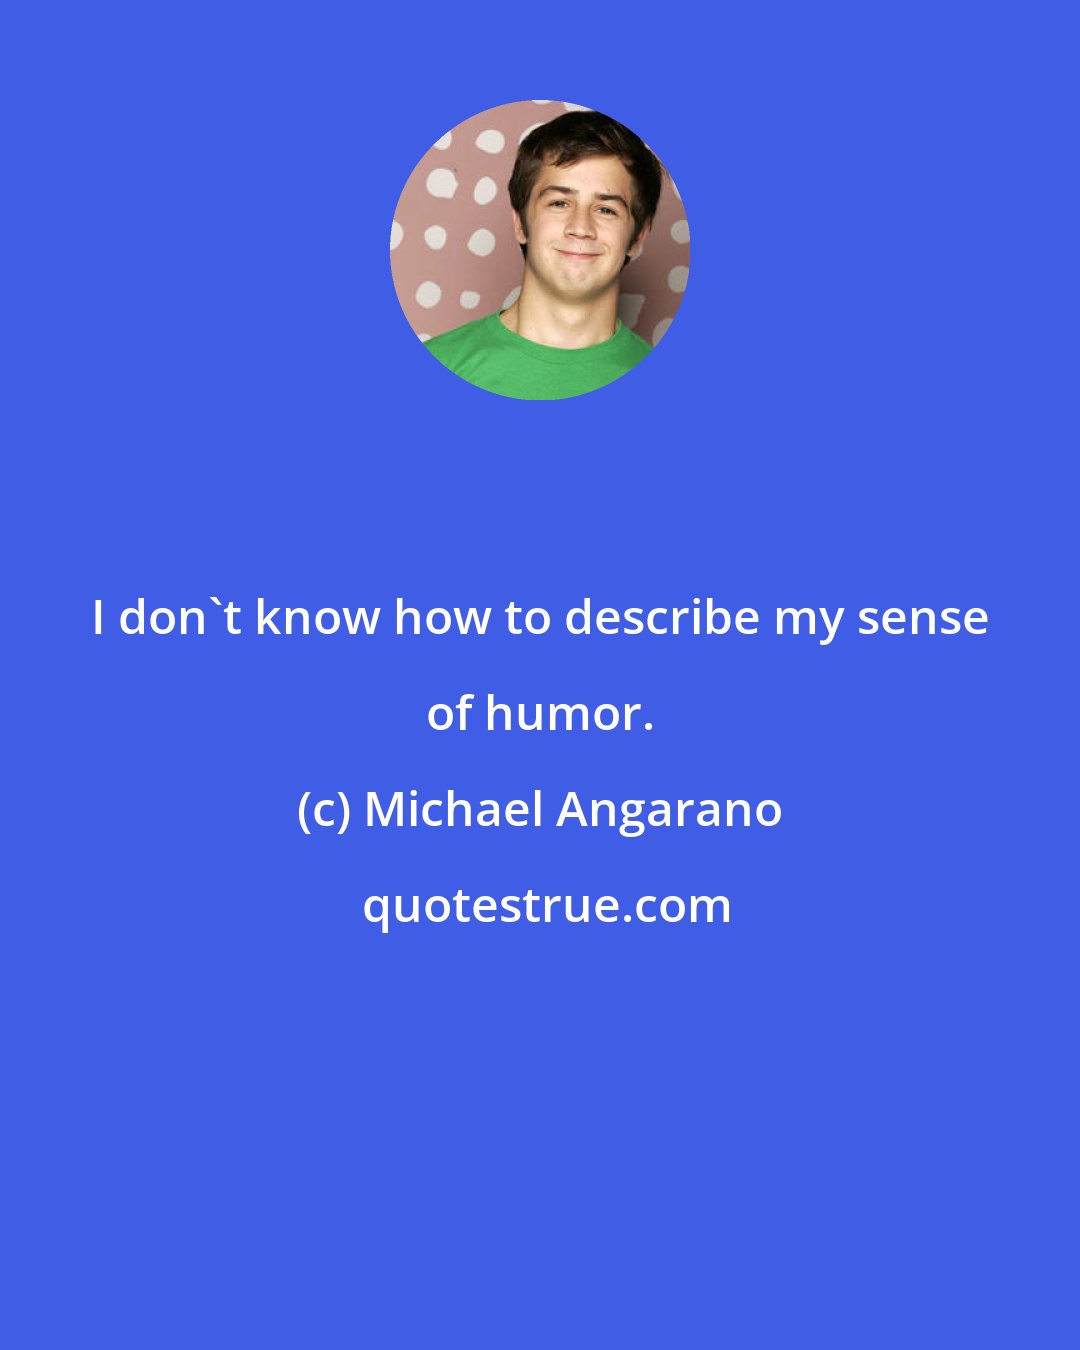 Michael Angarano: I don't know how to describe my sense of humor.